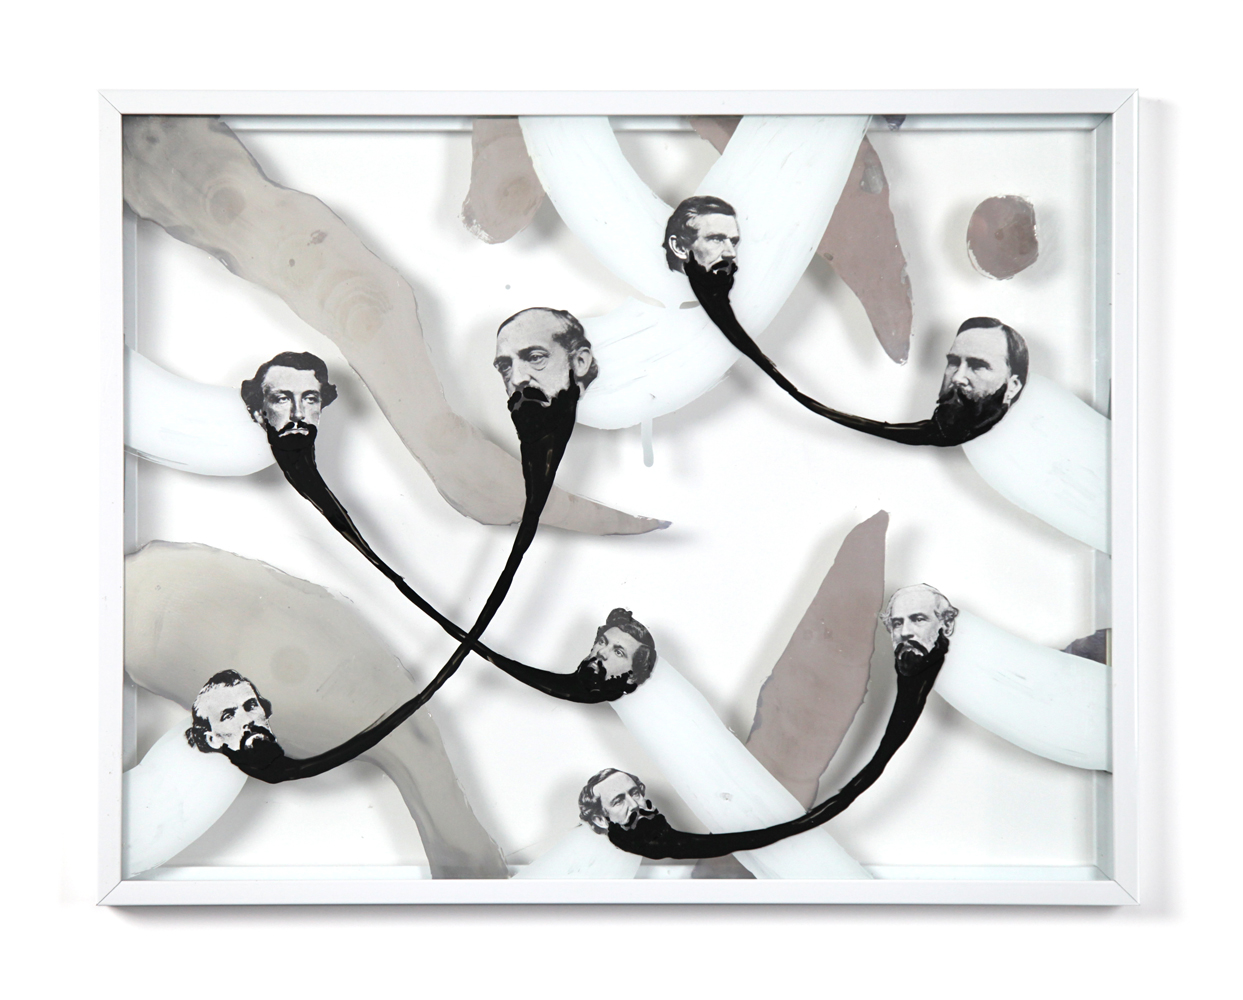   Barbarians 1 , 2013, enamel, silver nitrate and collage on glass 